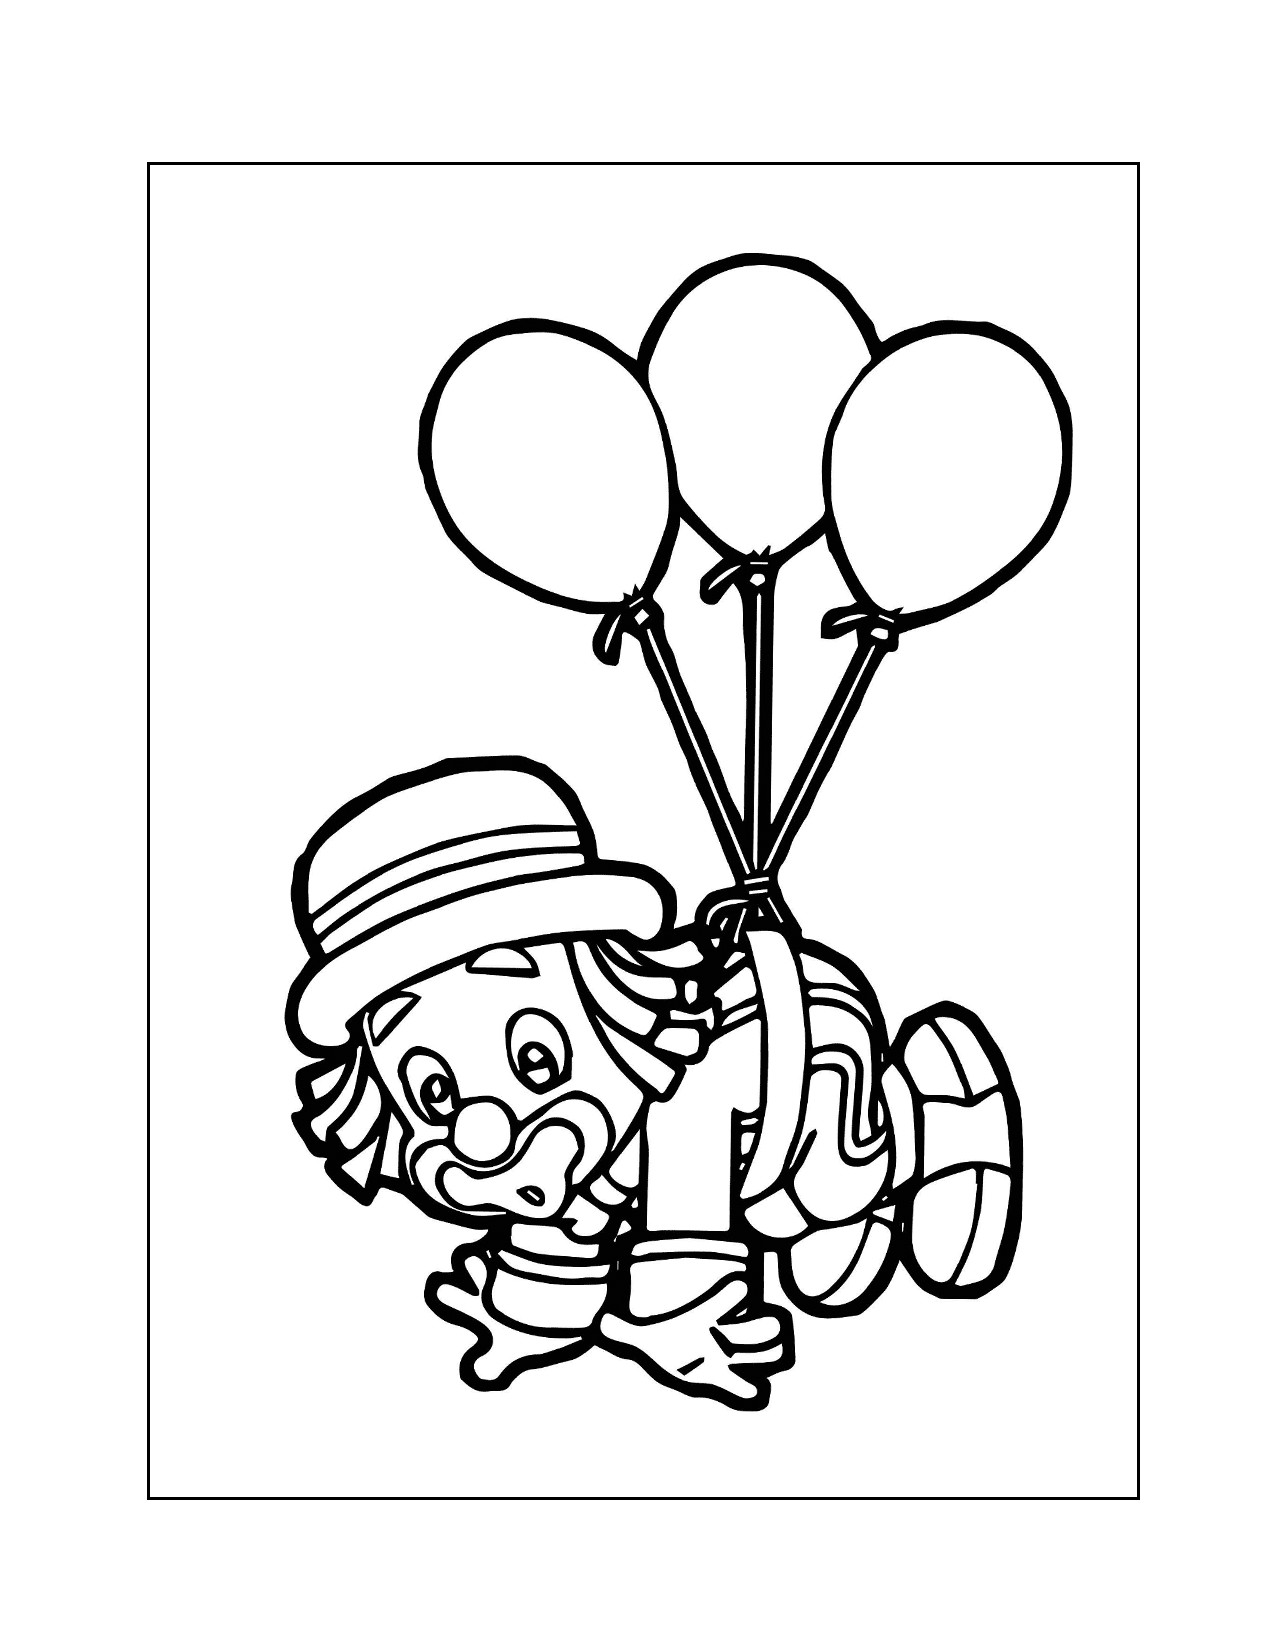 Cute Clown Floating On Balloons Coloring Page